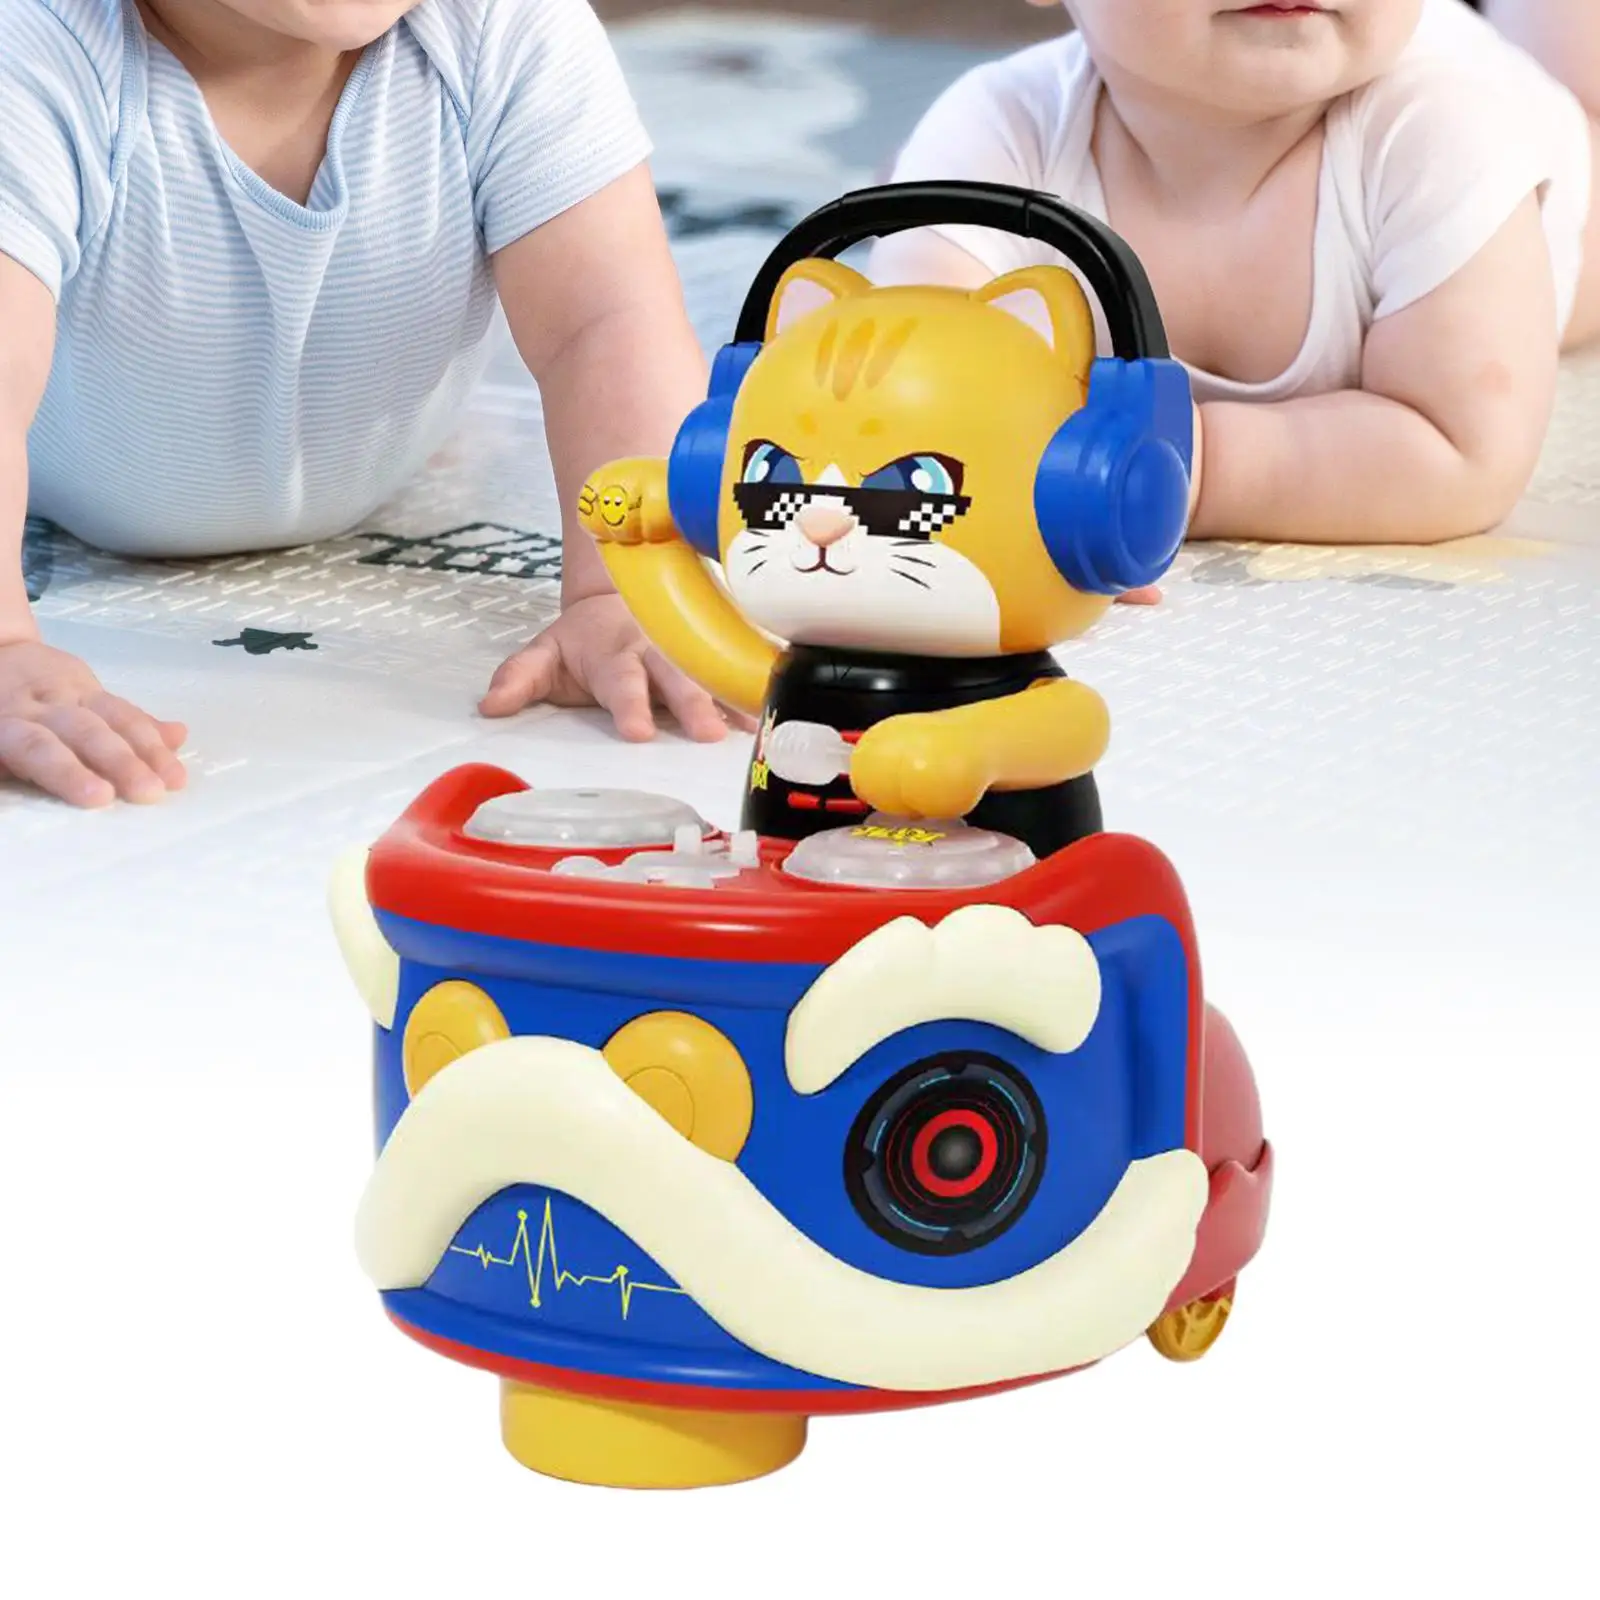 Baby Toy Smooth Surface Robot Interaction Toy Dancing Cat for Holiday Gift Child Entertainment Ages 1-3 Years Old Boys Girls